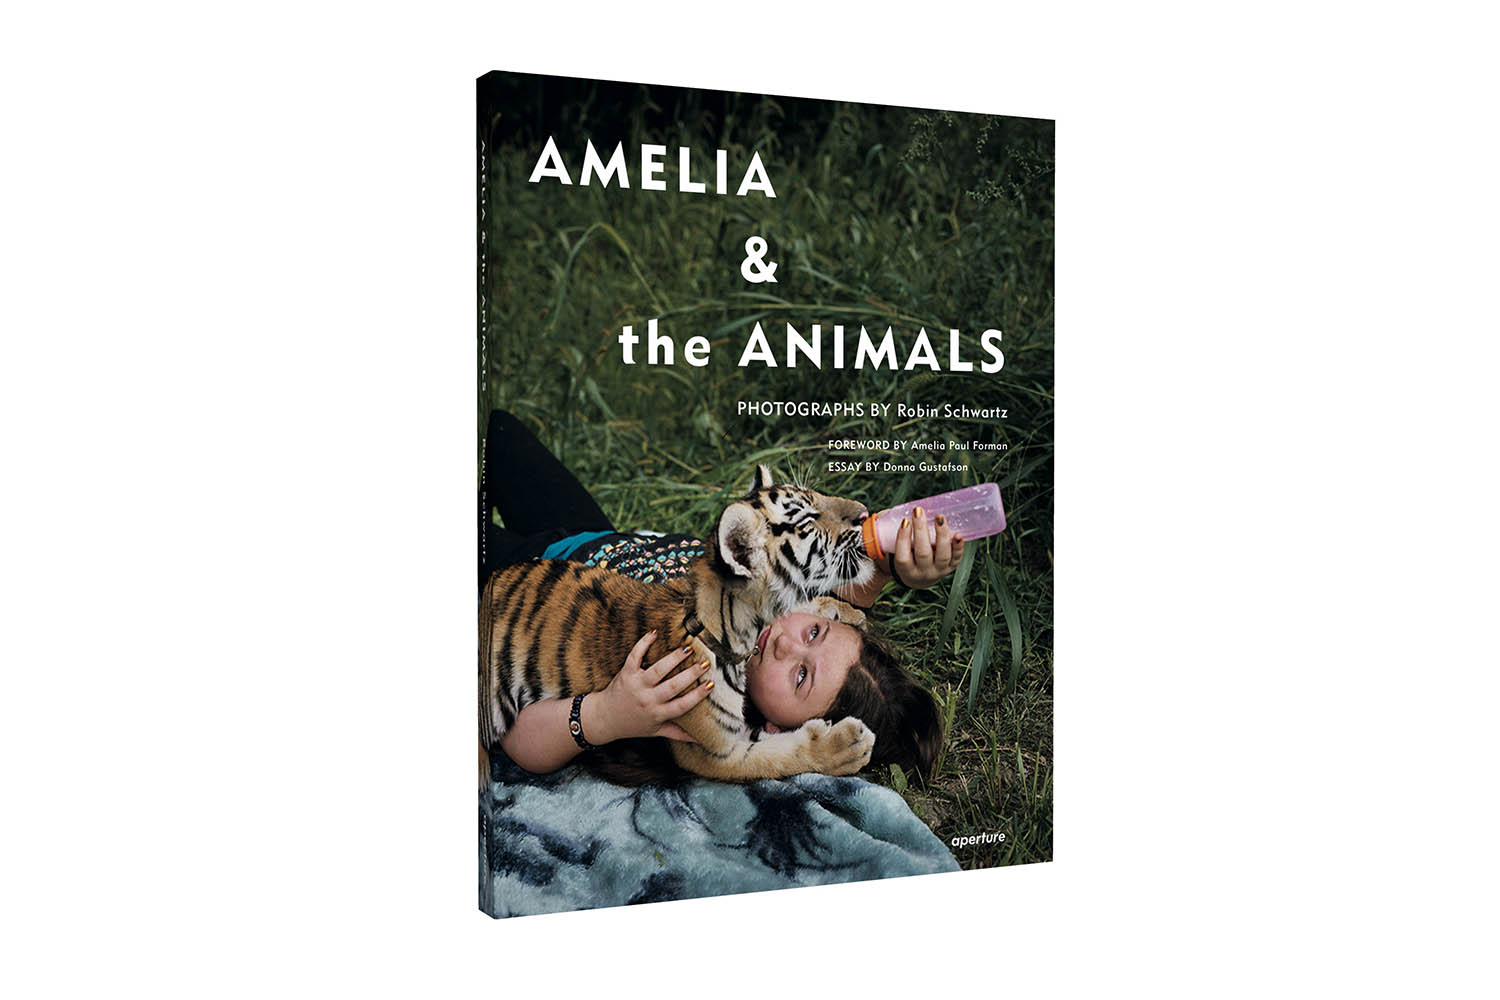 Robin Schwartz's Amelia and the Animals,  published by Aperture
                              
                              Robin Schwartz's images of animals have appeared in museum and galleries around the world, and her daughter Amelia has spent her lifetime among the animals her mother has photographed.